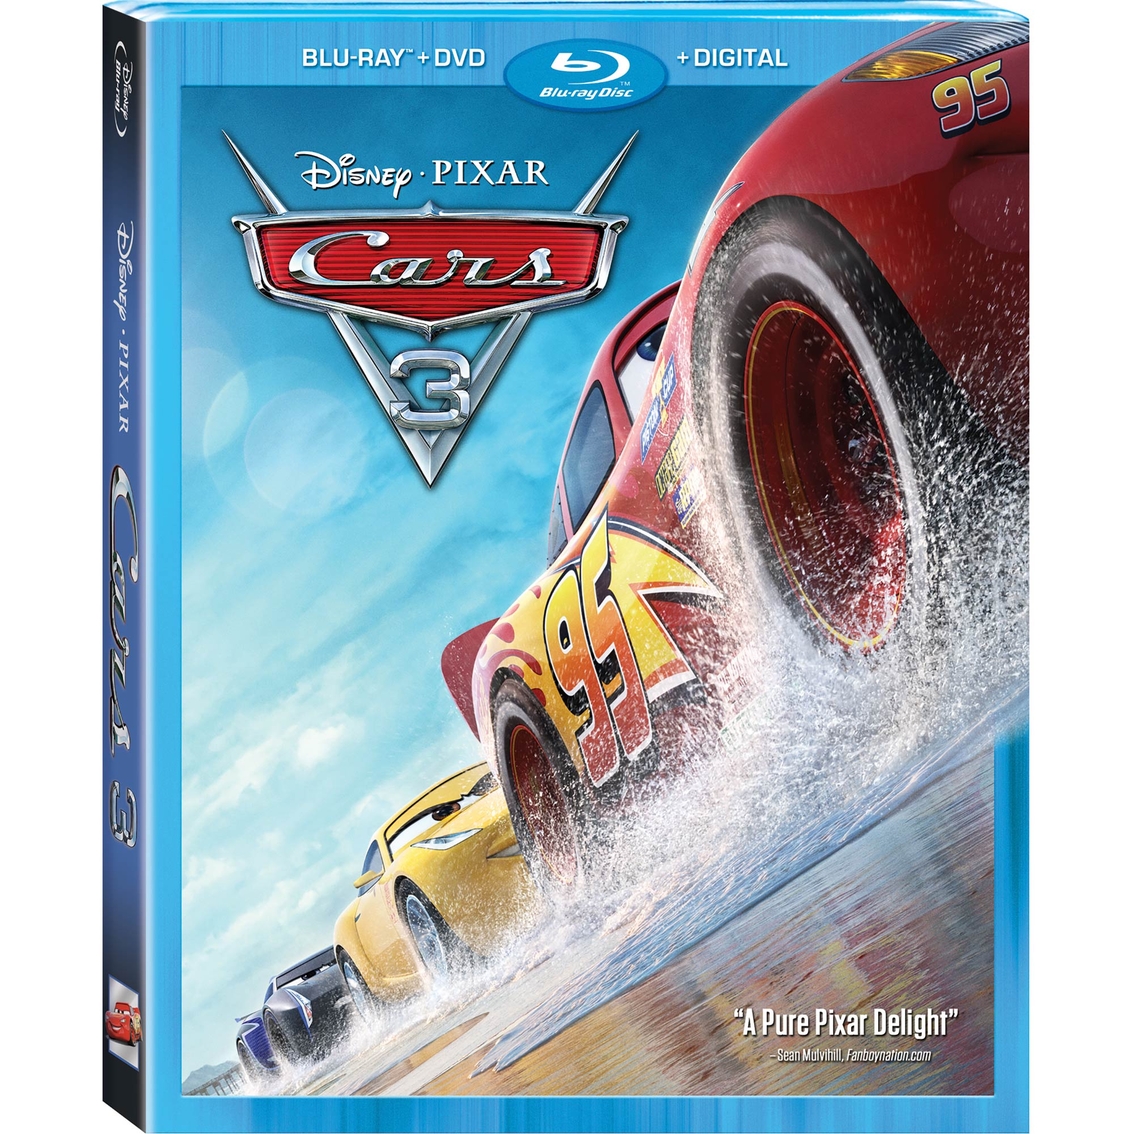 CARS 3 on Digital TODAY!